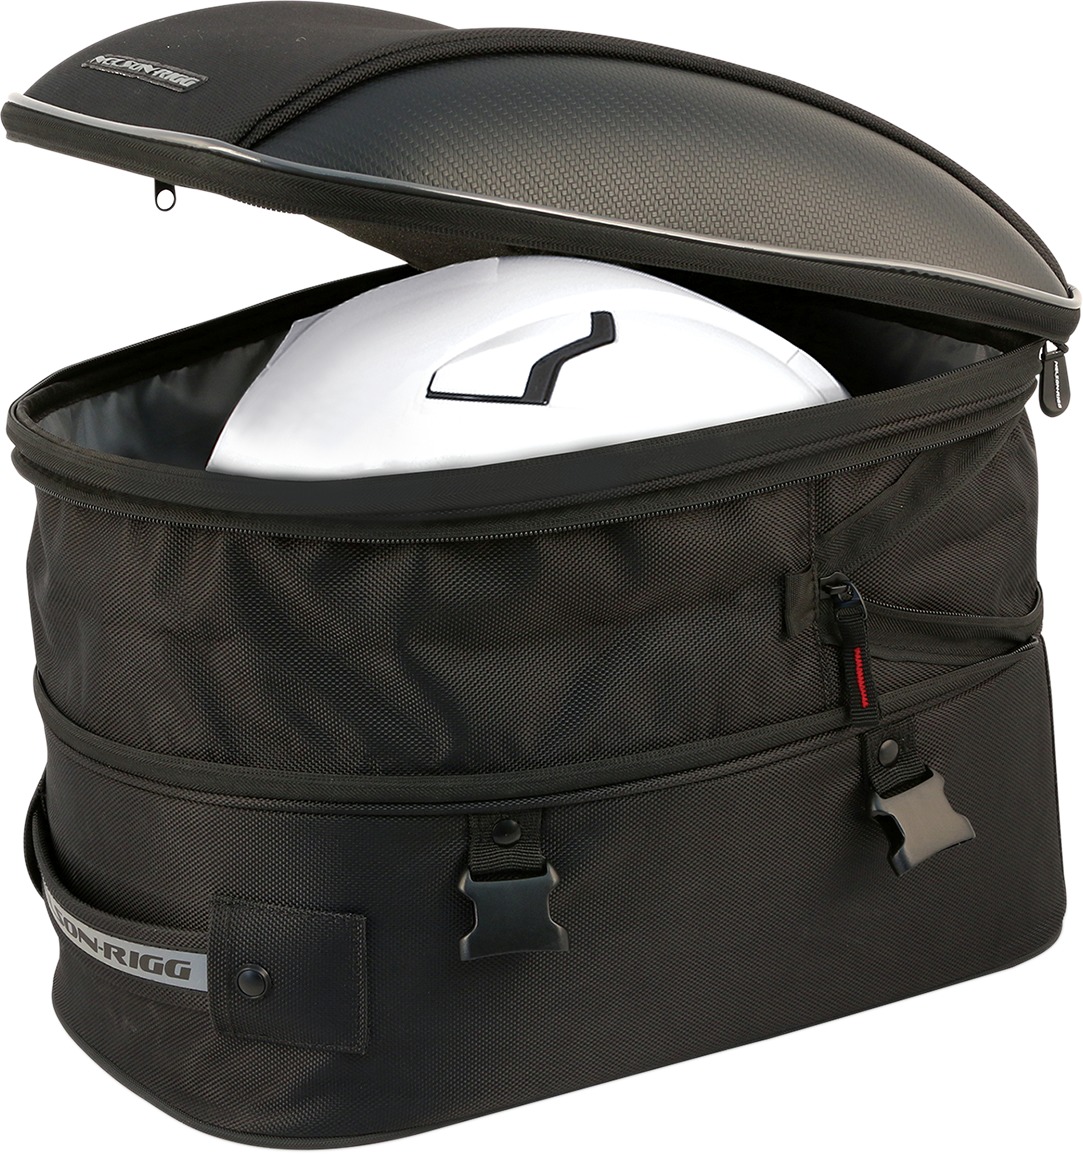 Nelson-Rigg CL-1060-ST2 Commuter Touring Tail Bag, Black, 24.78L, Universal Fit - Click Image to Close